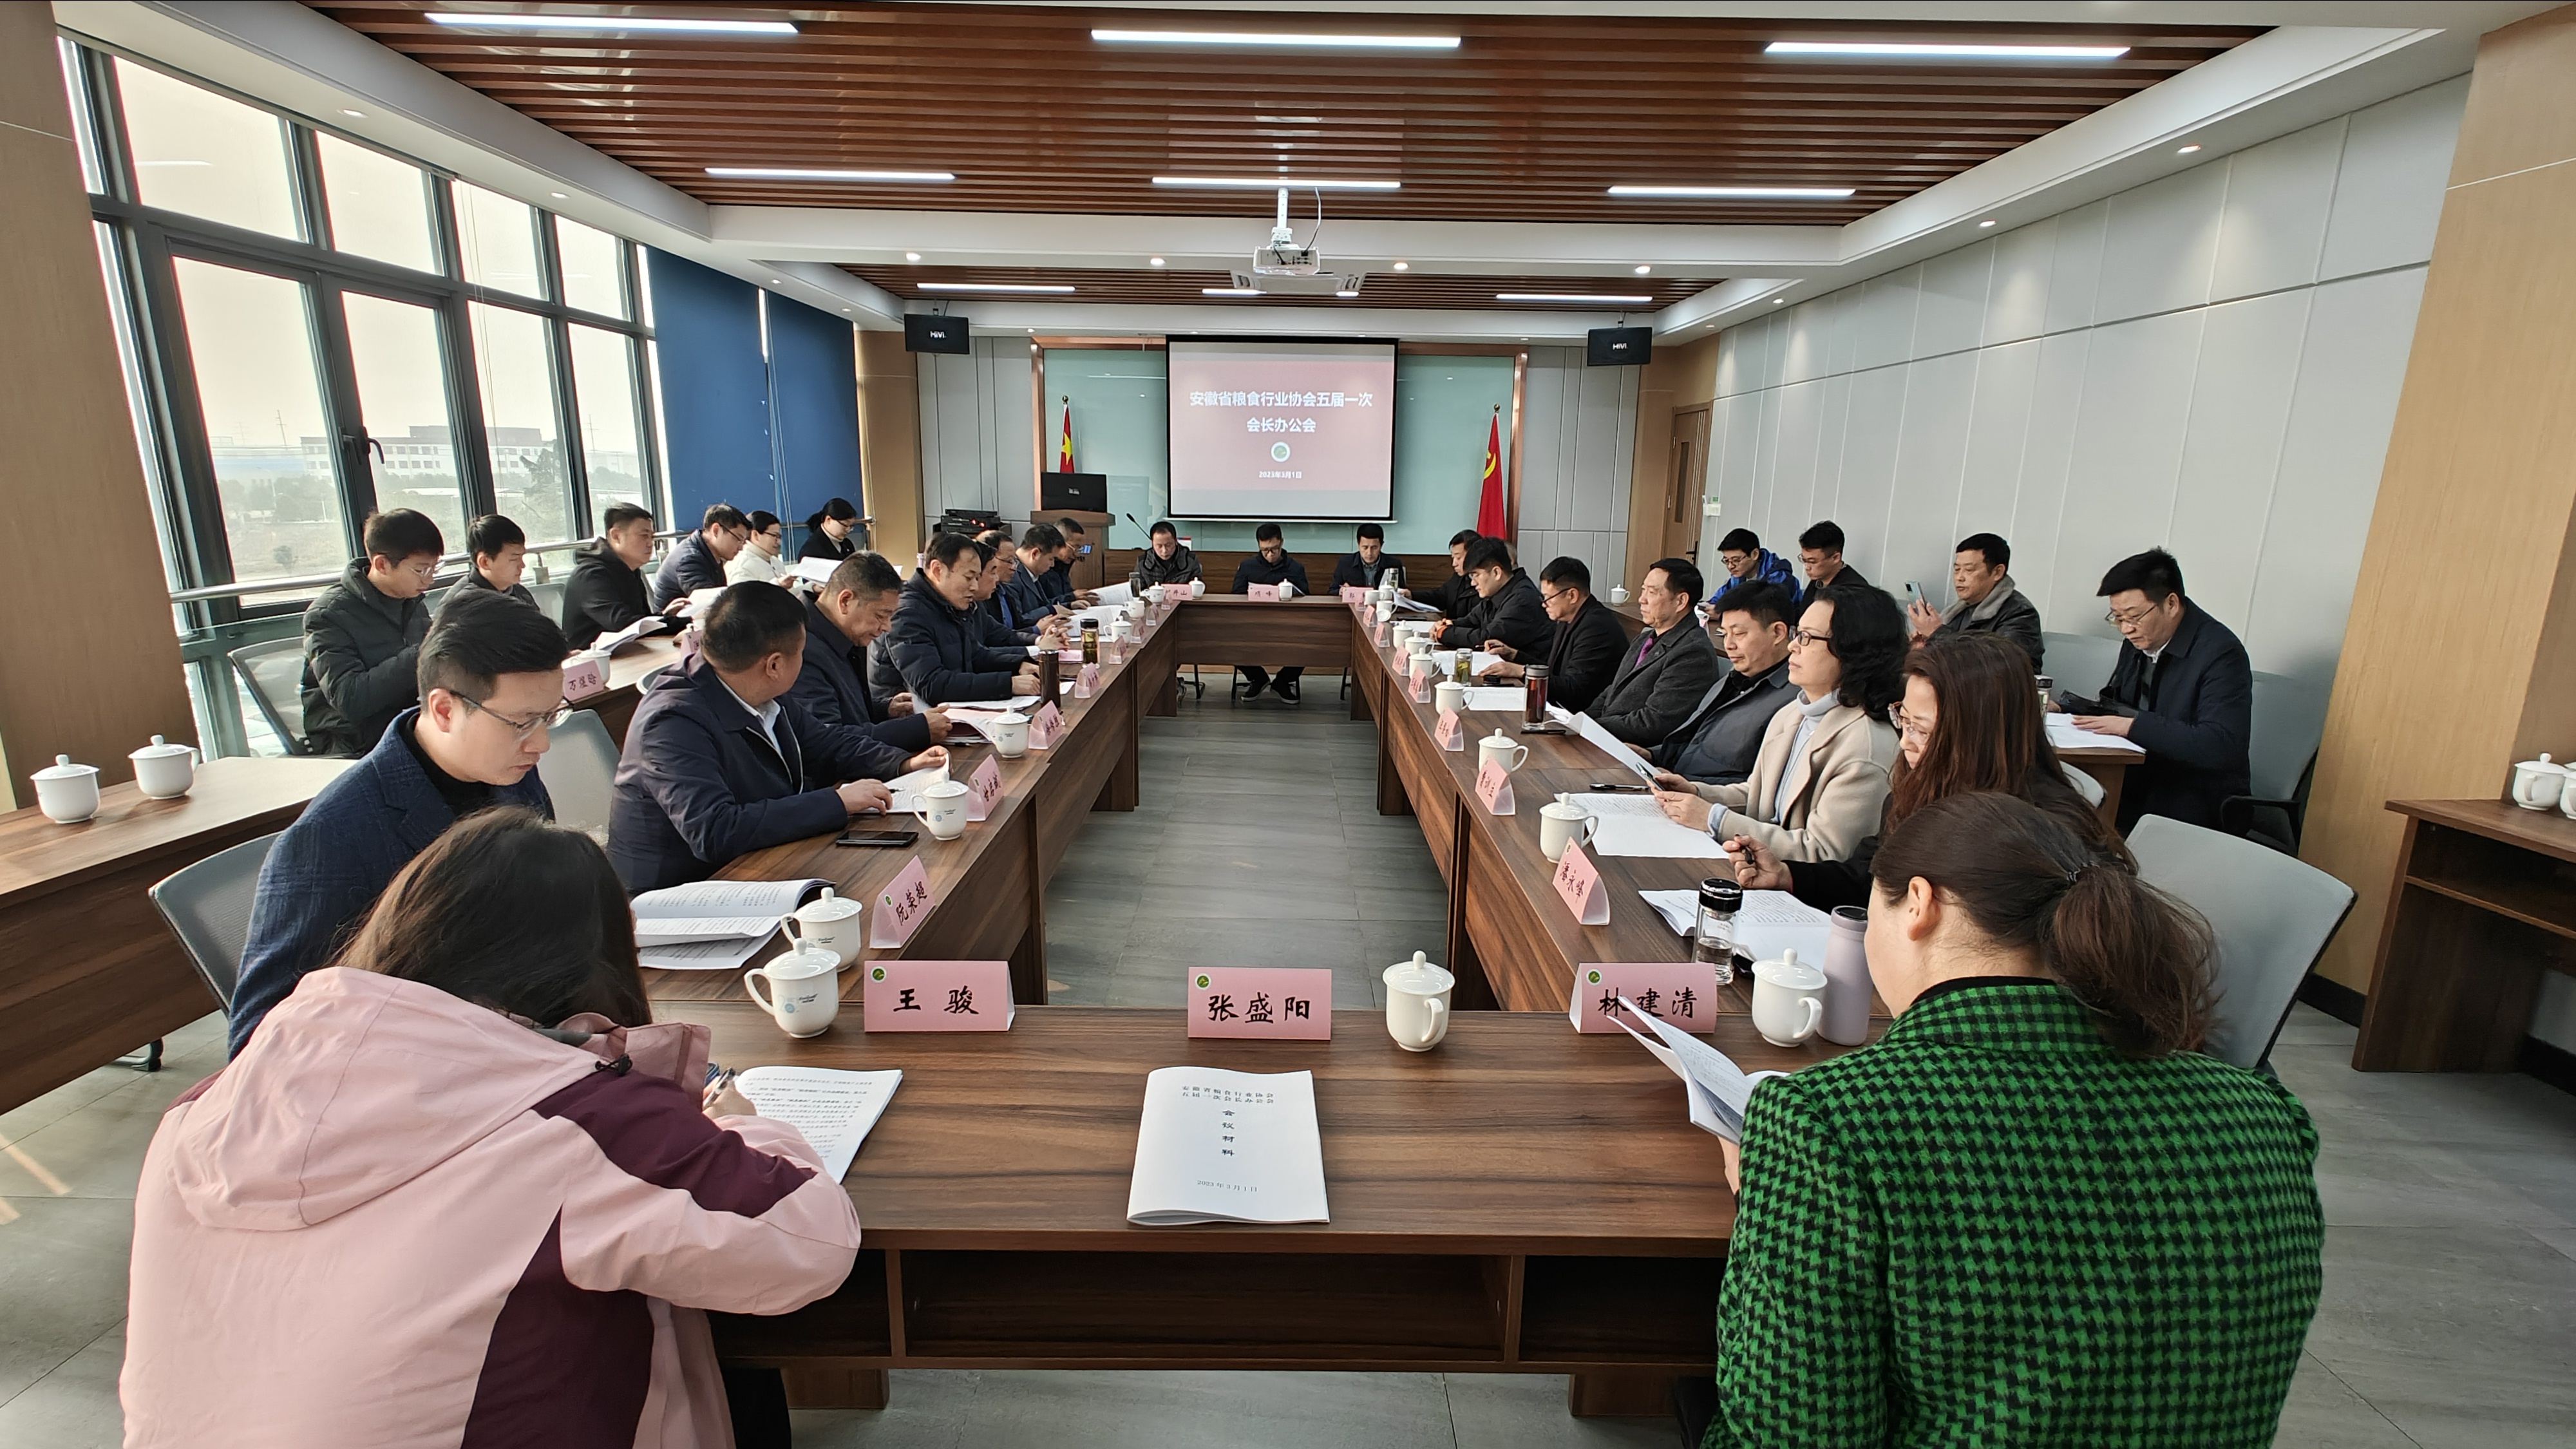 Anhui Provincial Grain Industry Association's Fifth President's Office Meeting Was Successfully Held in Yongcheng